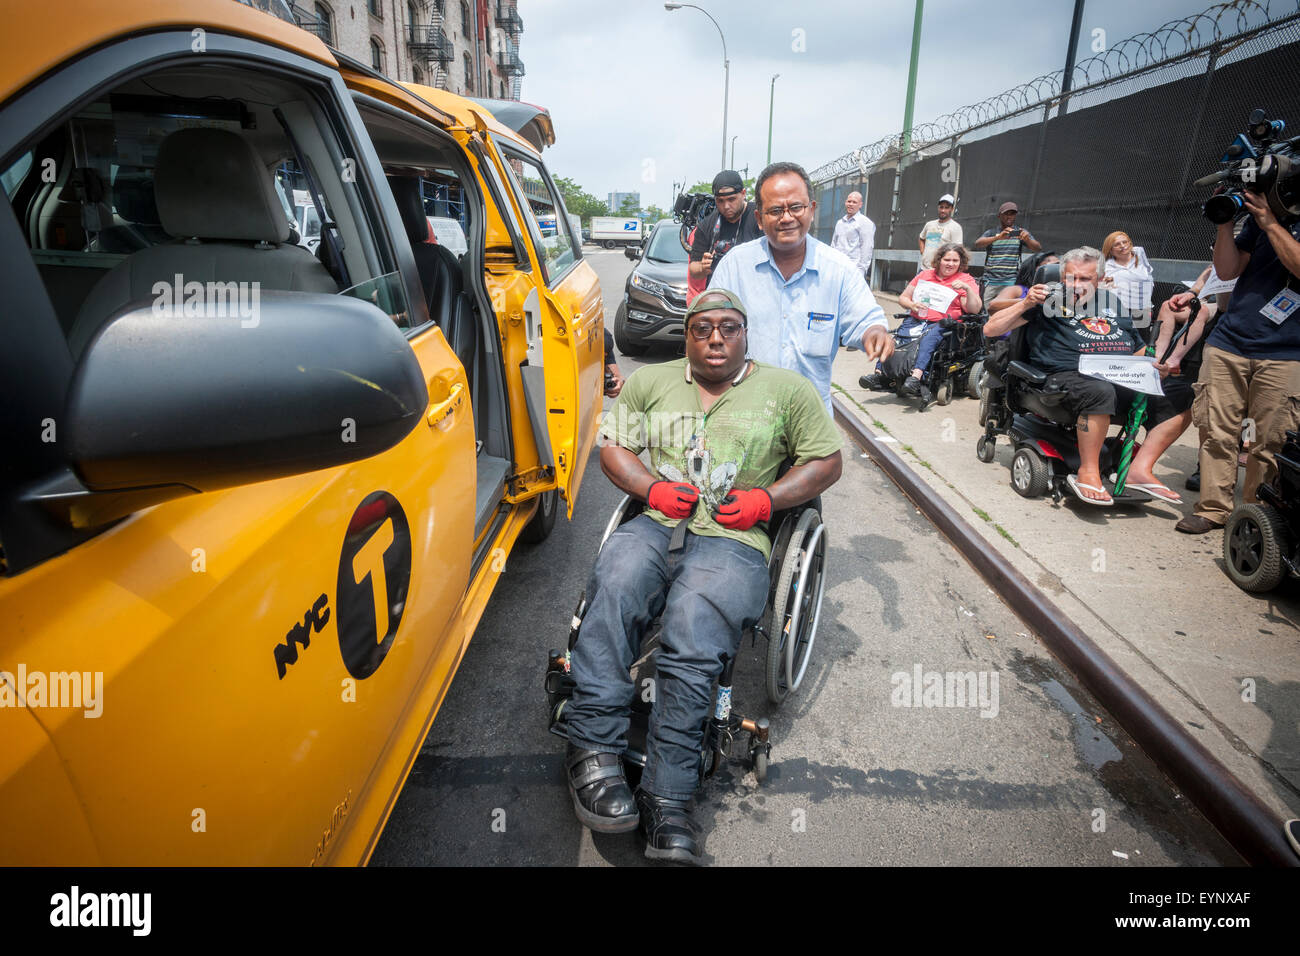 A protester arrives via accessible taxi to the Taxis For All Campaign protest in front of Uber headquarters in West Chelsea in New York on Thursday, July 30, 2015. The protesters had a 'roll-in' calling on the company to stop discriminating against the disabled by requiring handicapped accessible vehicles. Out of 20,777 Uber cars on the road not one of them is wheelchair accessible. (© Richard B. Levine) Stock Photo